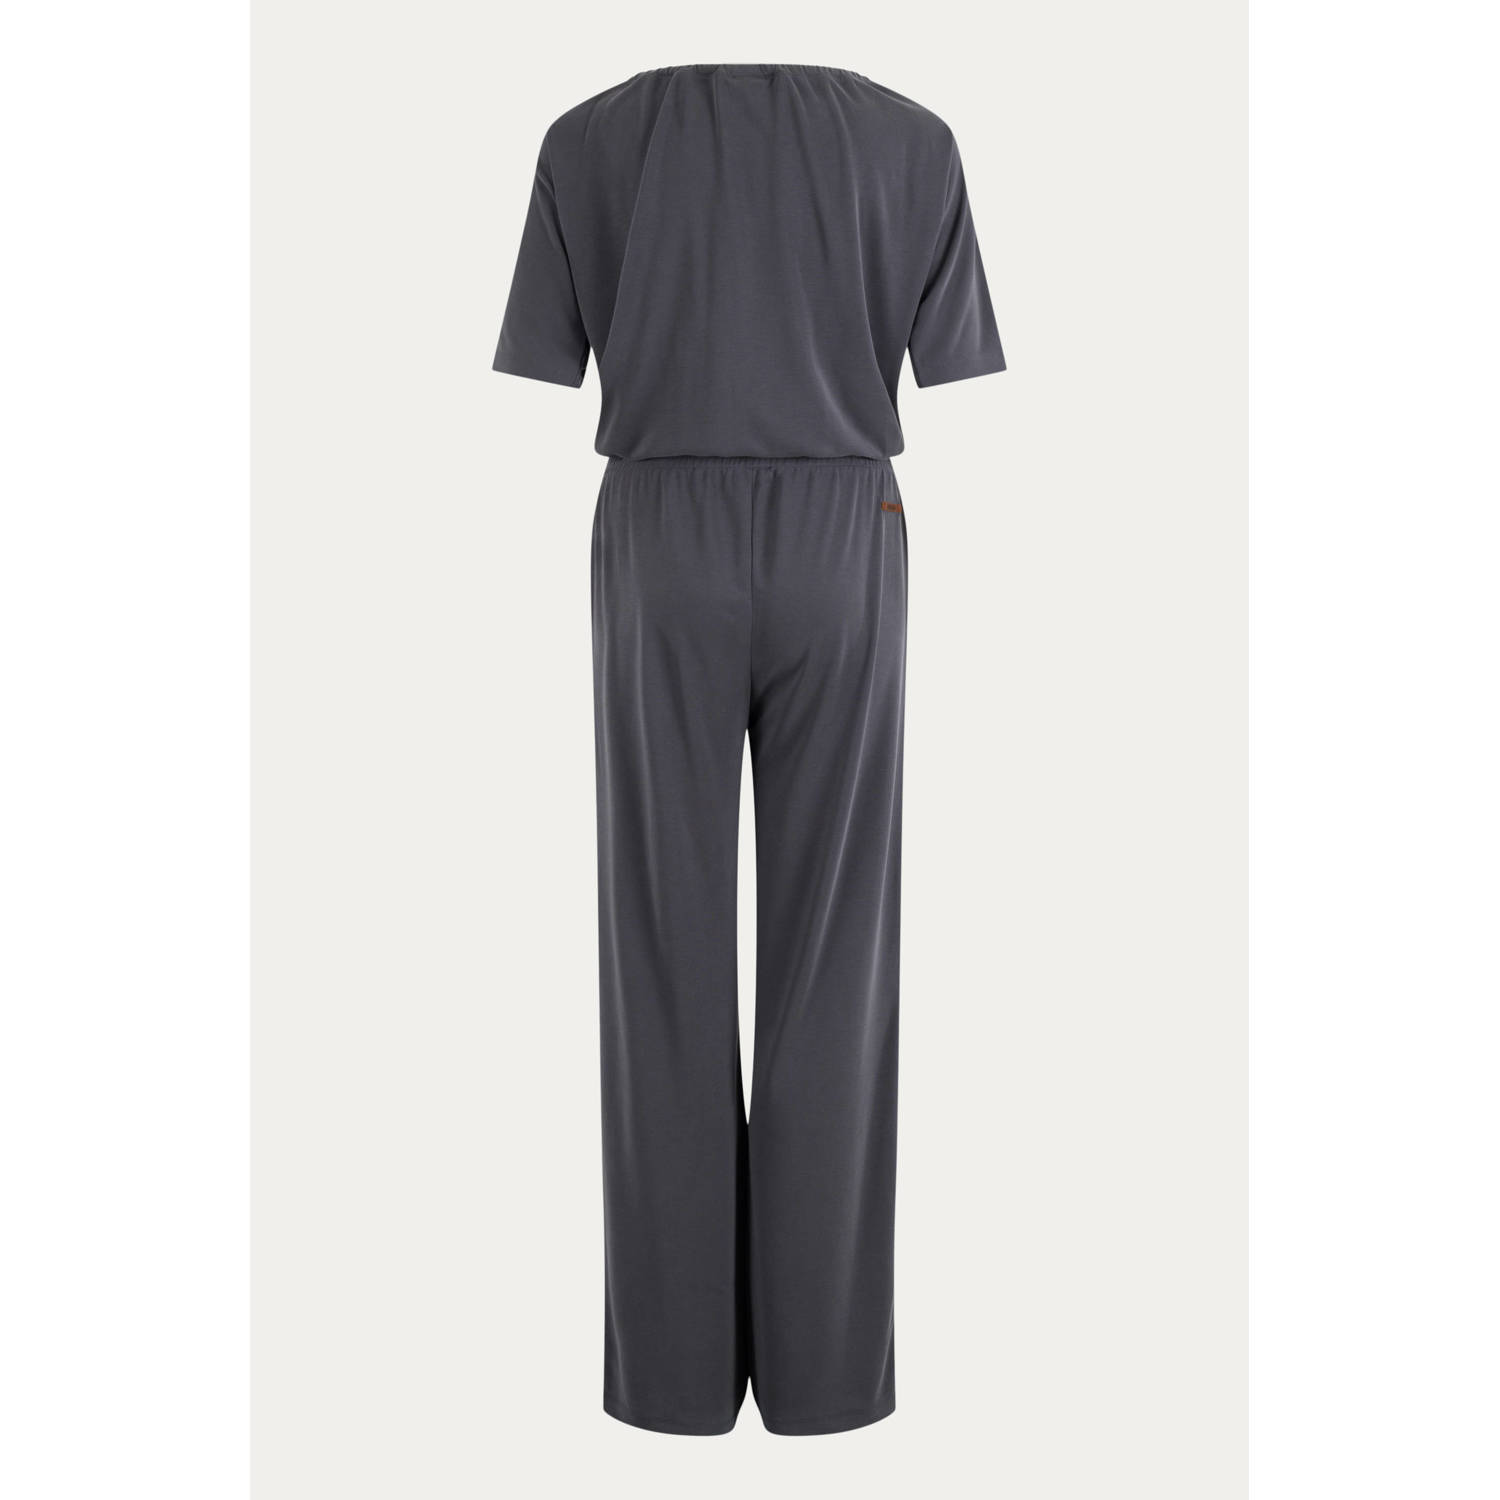 Moscow jumpsuit donkergrijs